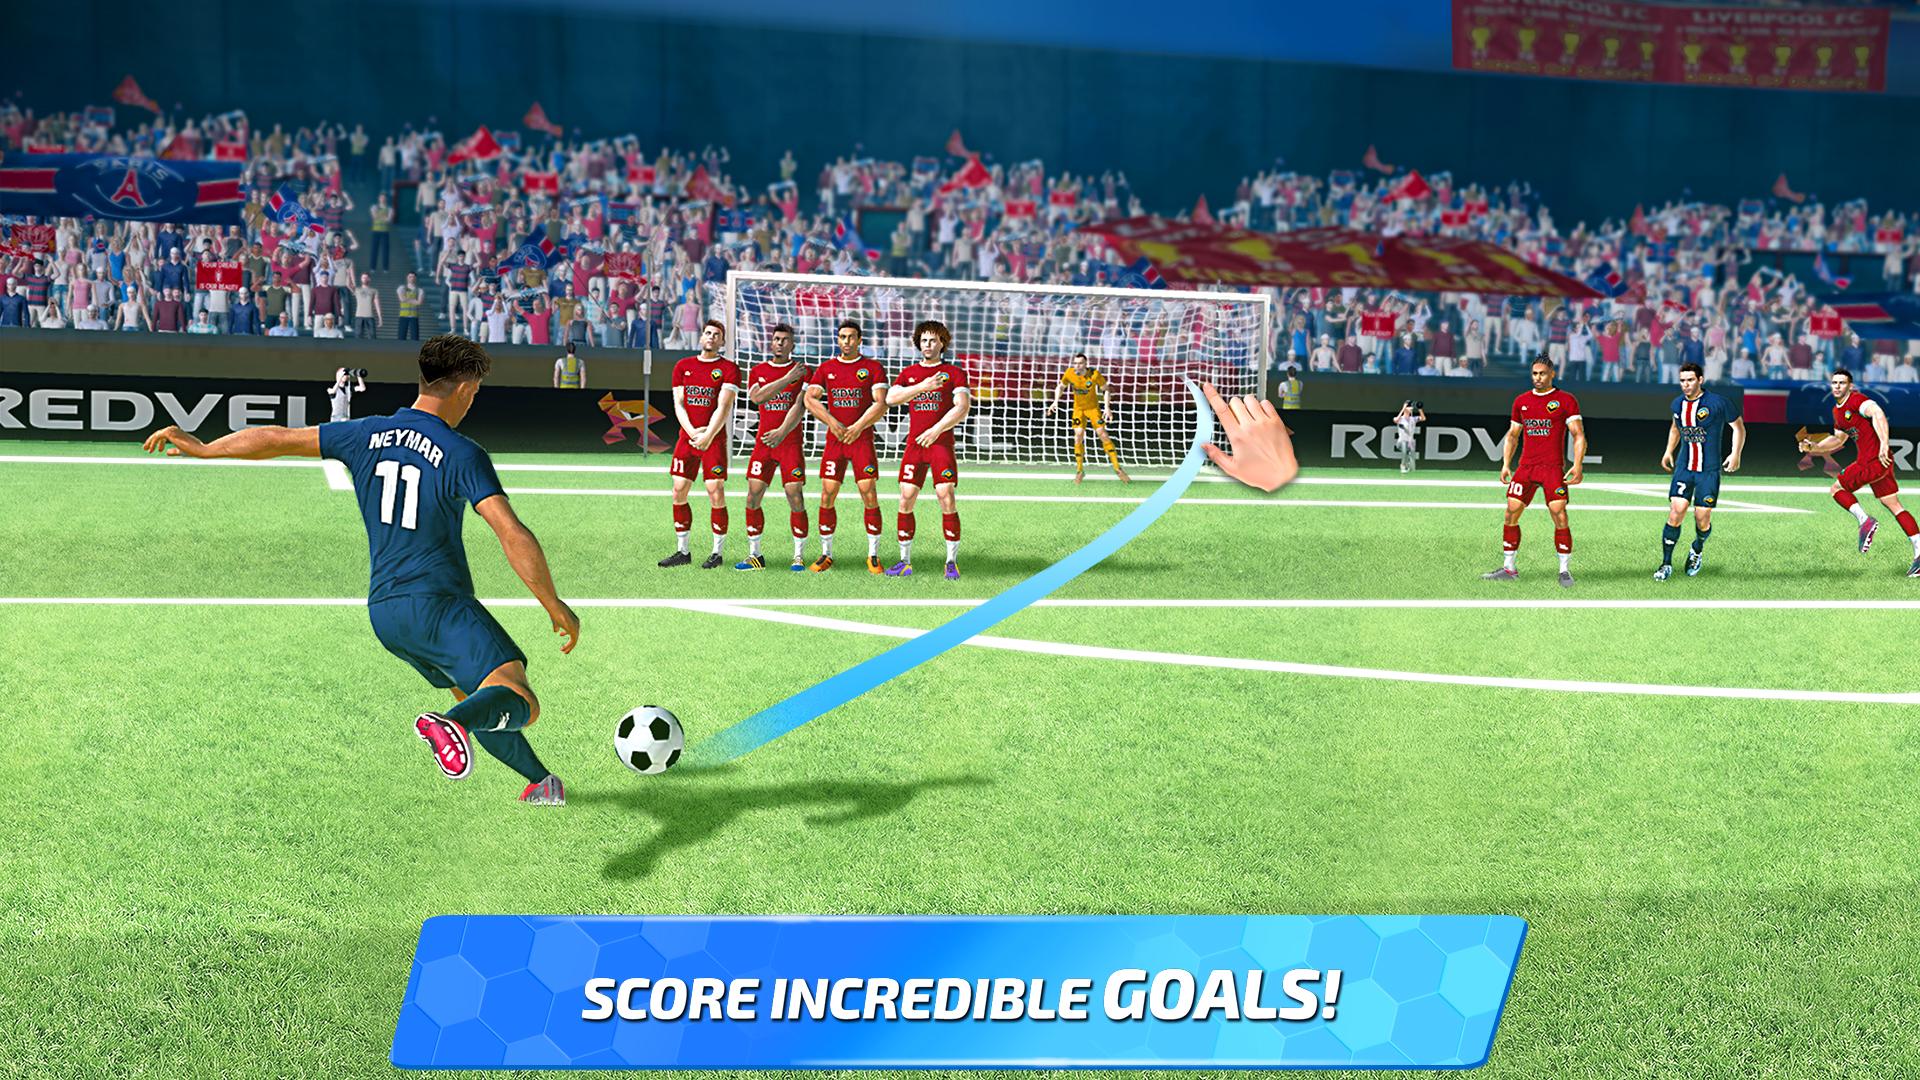 Soccer Star 22: World Football Mod apk [Unlimited money] download - Soccer  Star 22: World Football MOD apk 4.5.2 free for Android.